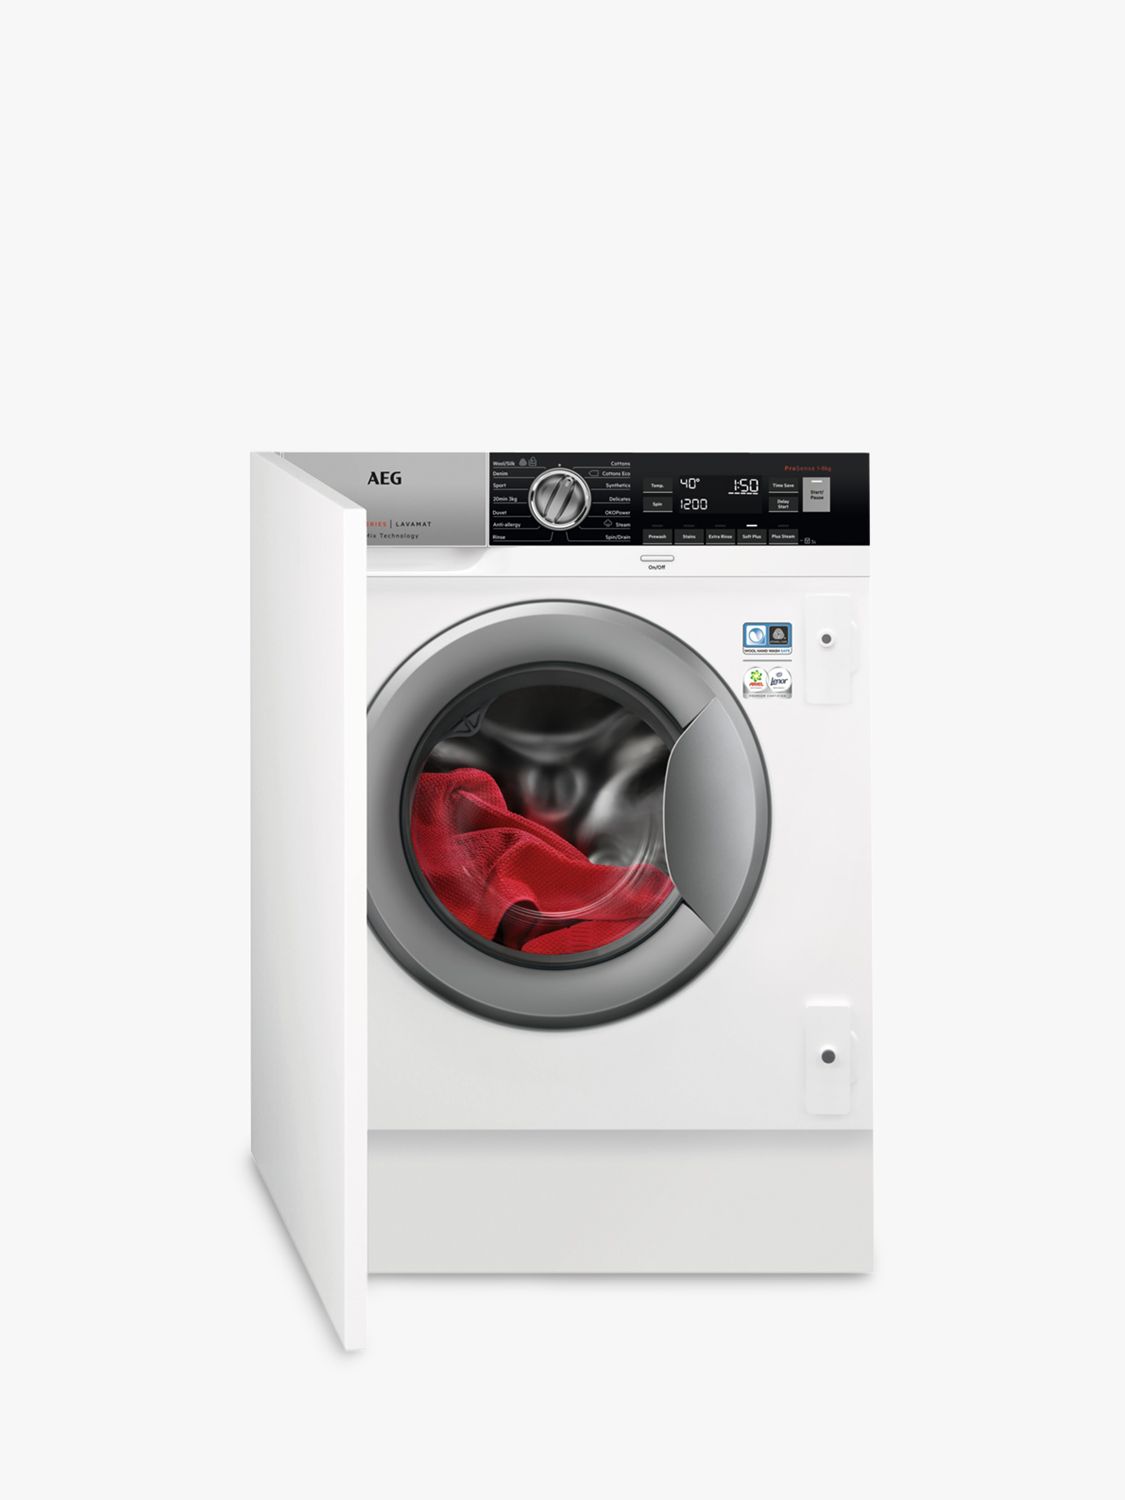 AEG L8FC8432BI Integrated Washing Machine, 8kg Load, A+++ Energy Rating, 1400rpm Spin, White